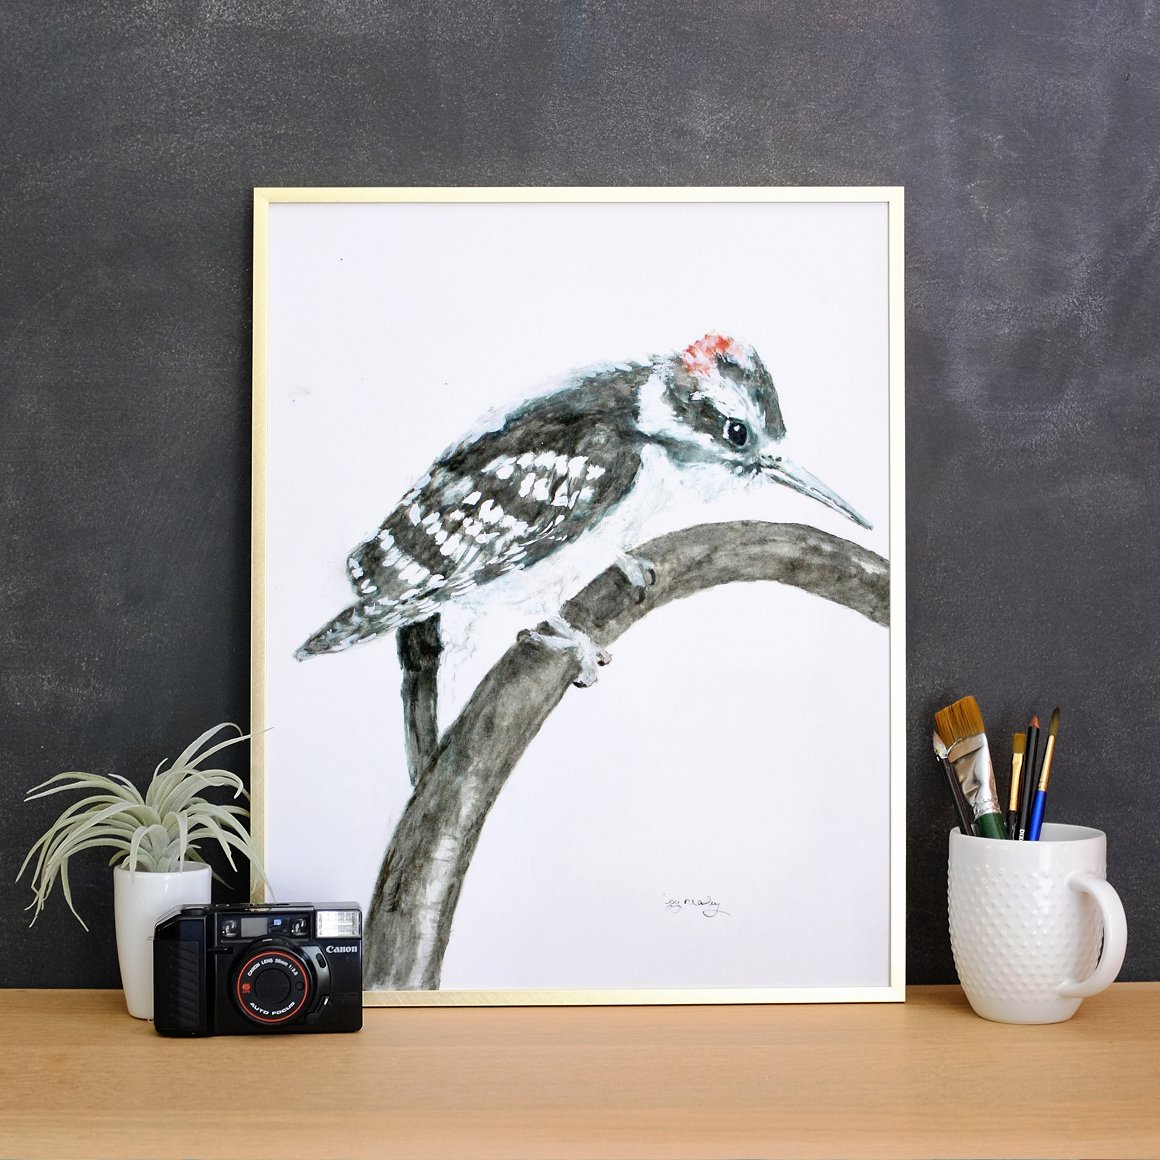 Picture of a woodpecker on canvas.